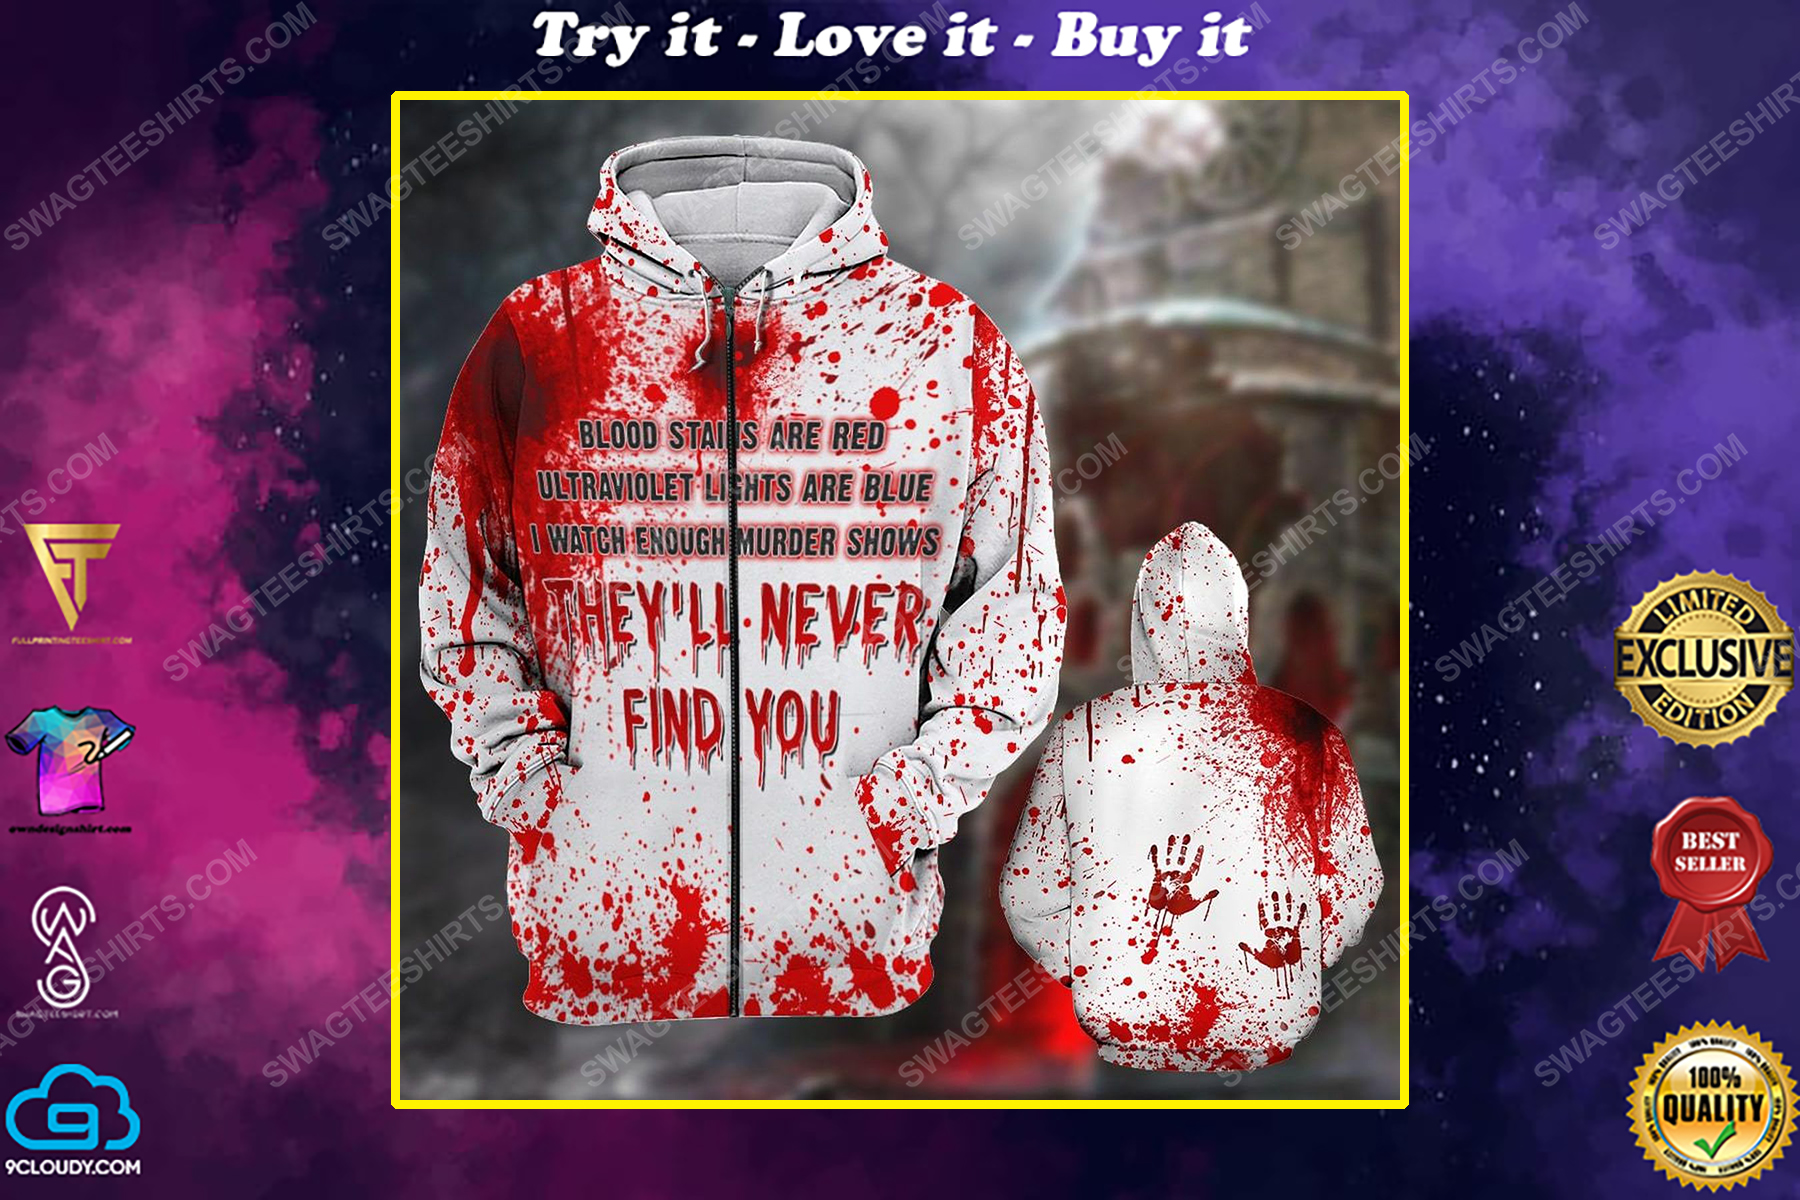 Halloween blood stains are red ultraviolet lights are blue i watch enough murder shows they'll never find you shirt